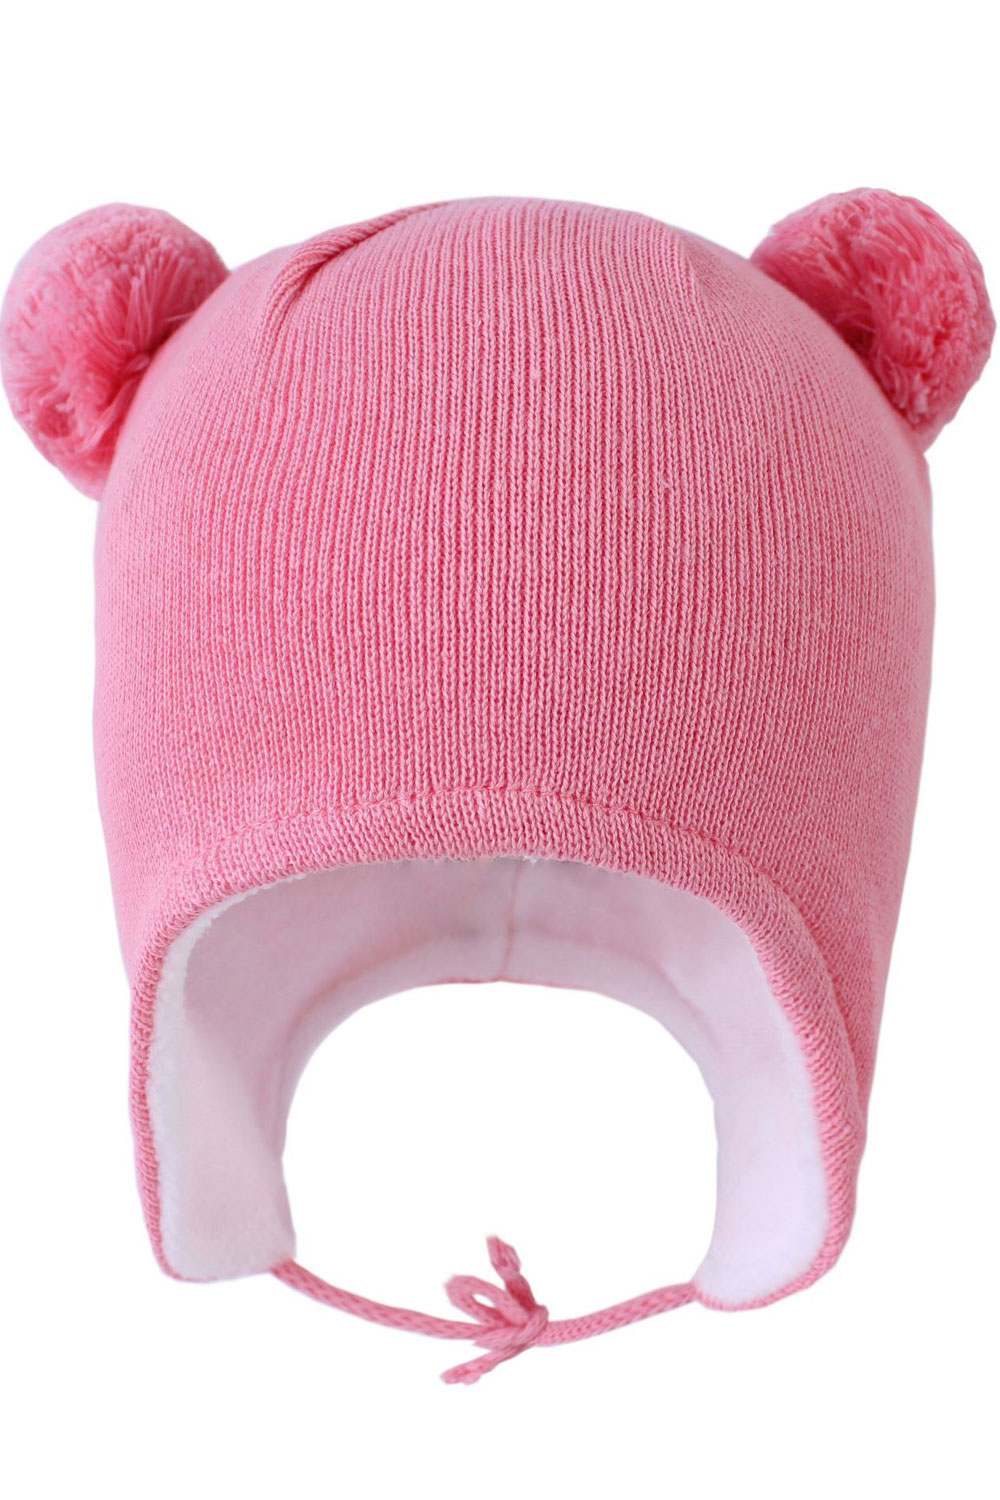 Jhon Peters Kids Elegant Solid Color Hair Ball Decorated Warm Cap